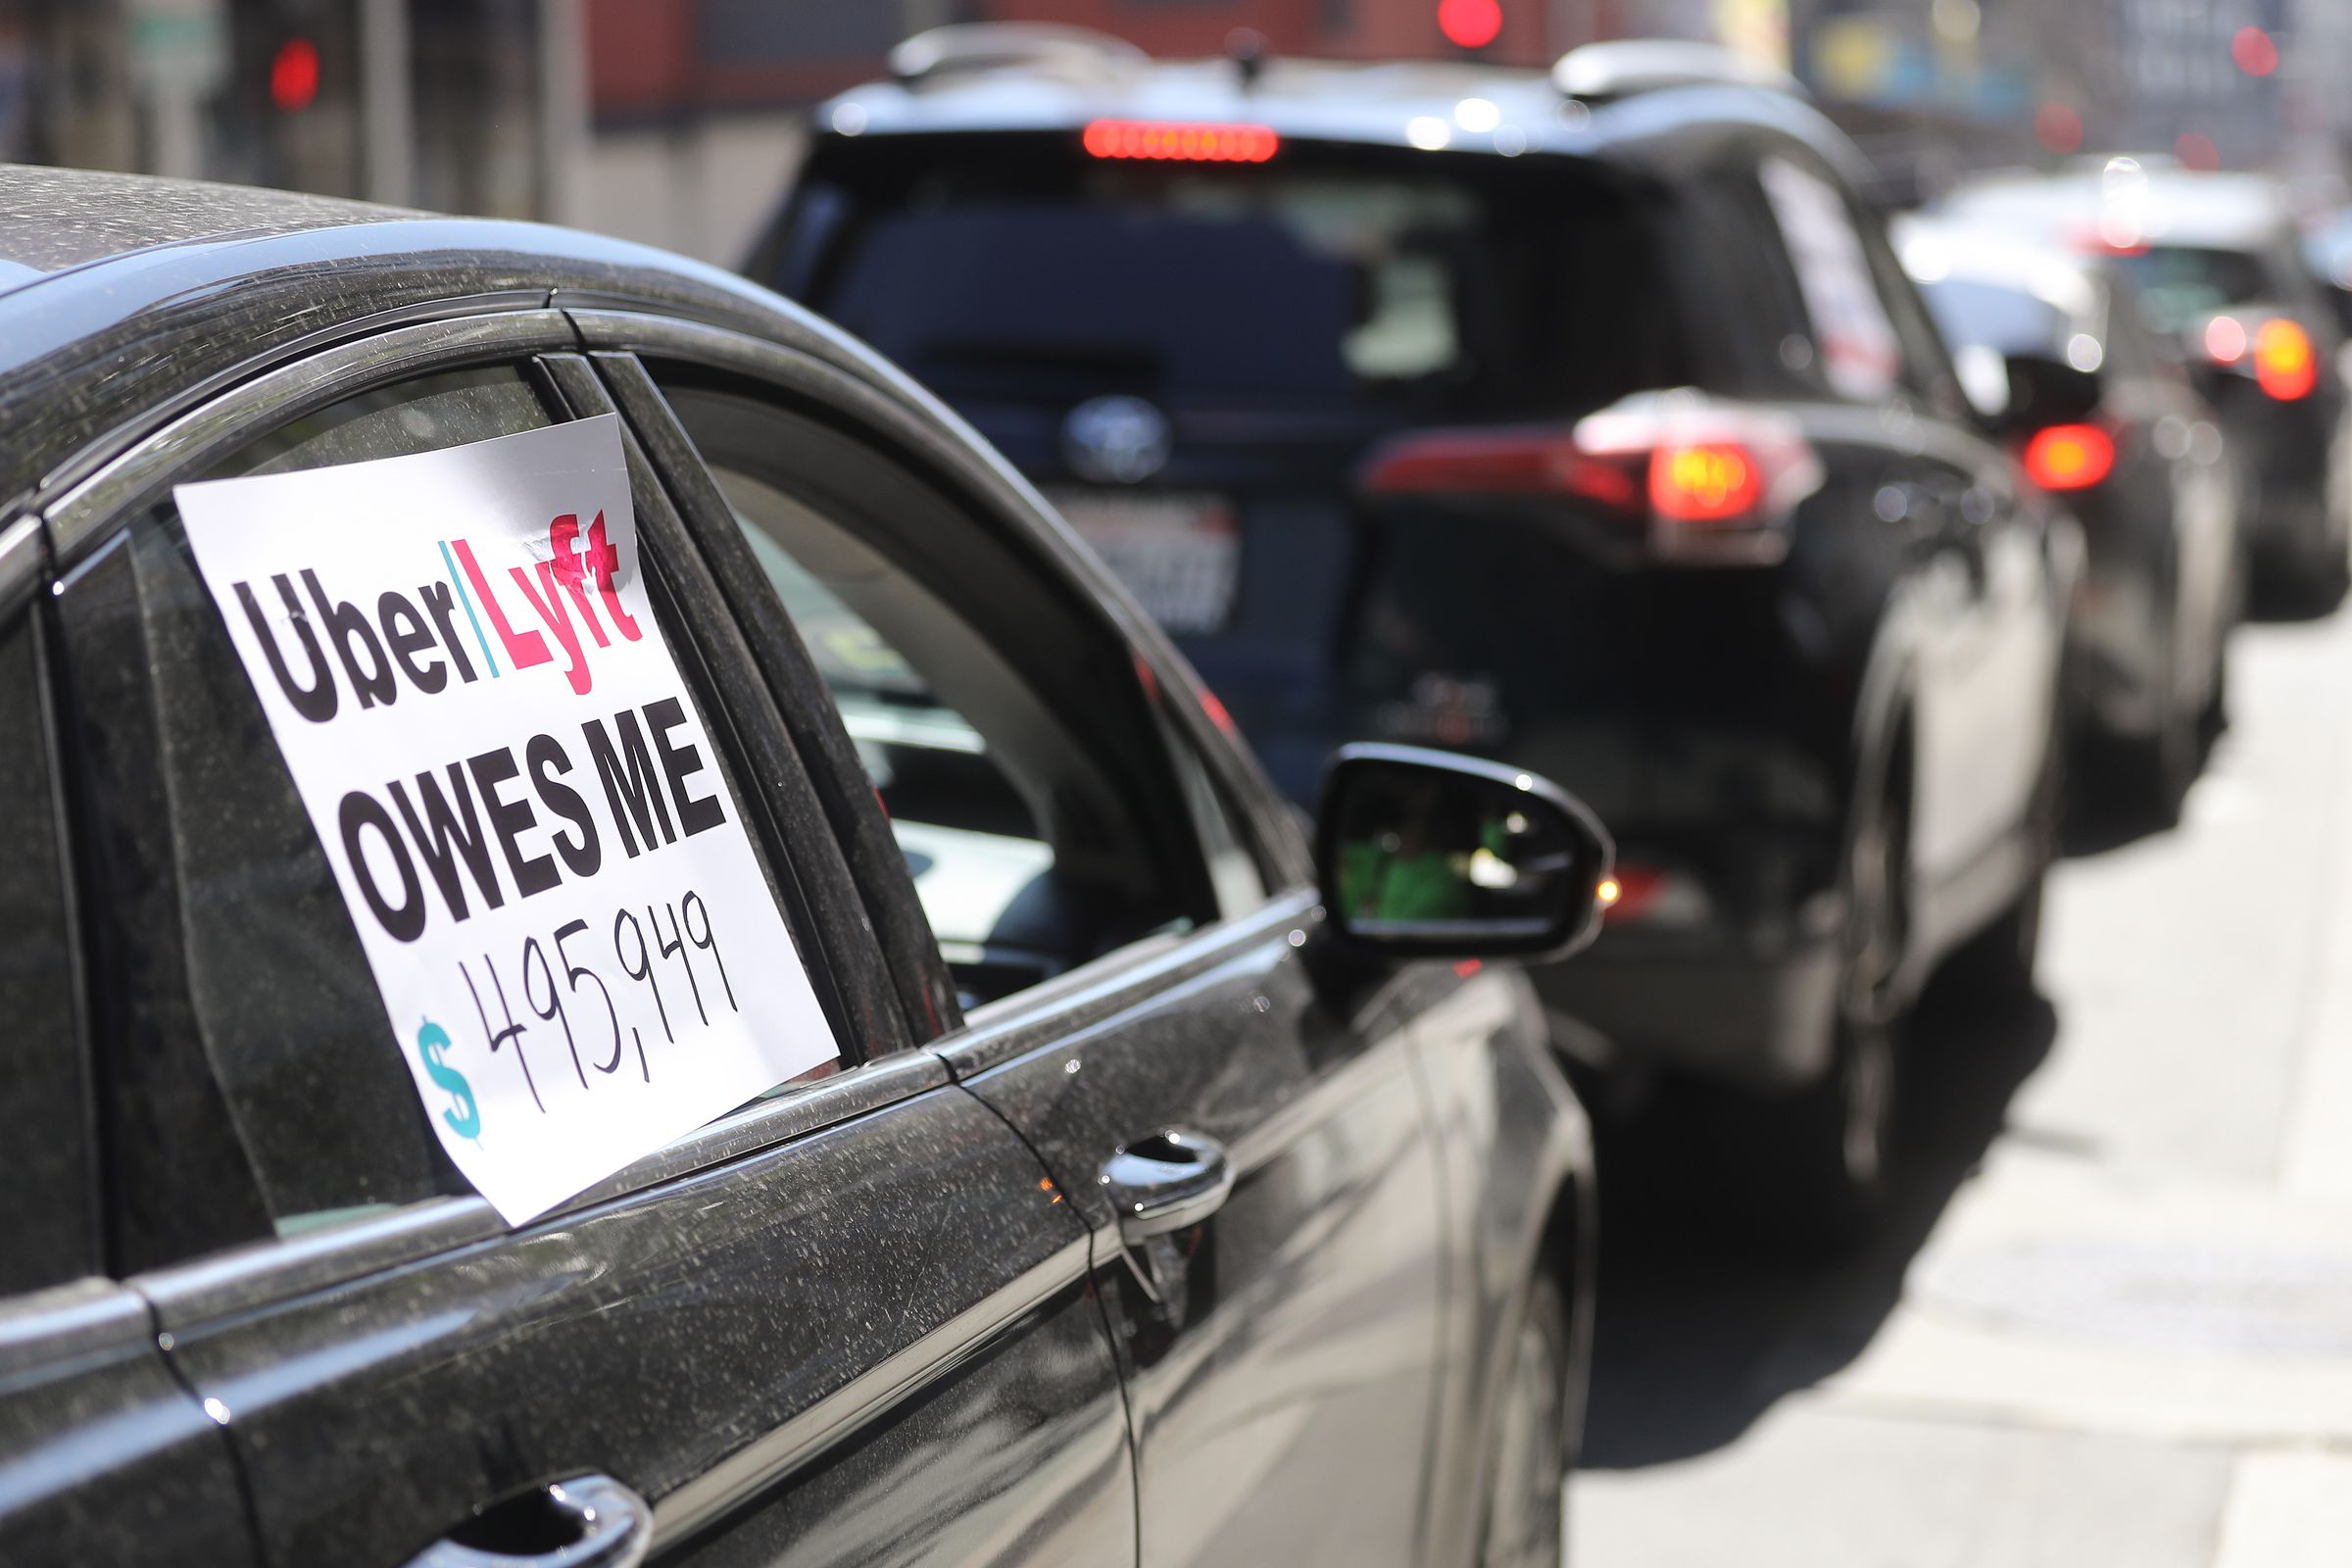 Transportation Union And Rideshare Drivers United Members Hold Rolling Vehicle Protest Calling On State To Enforce AB5